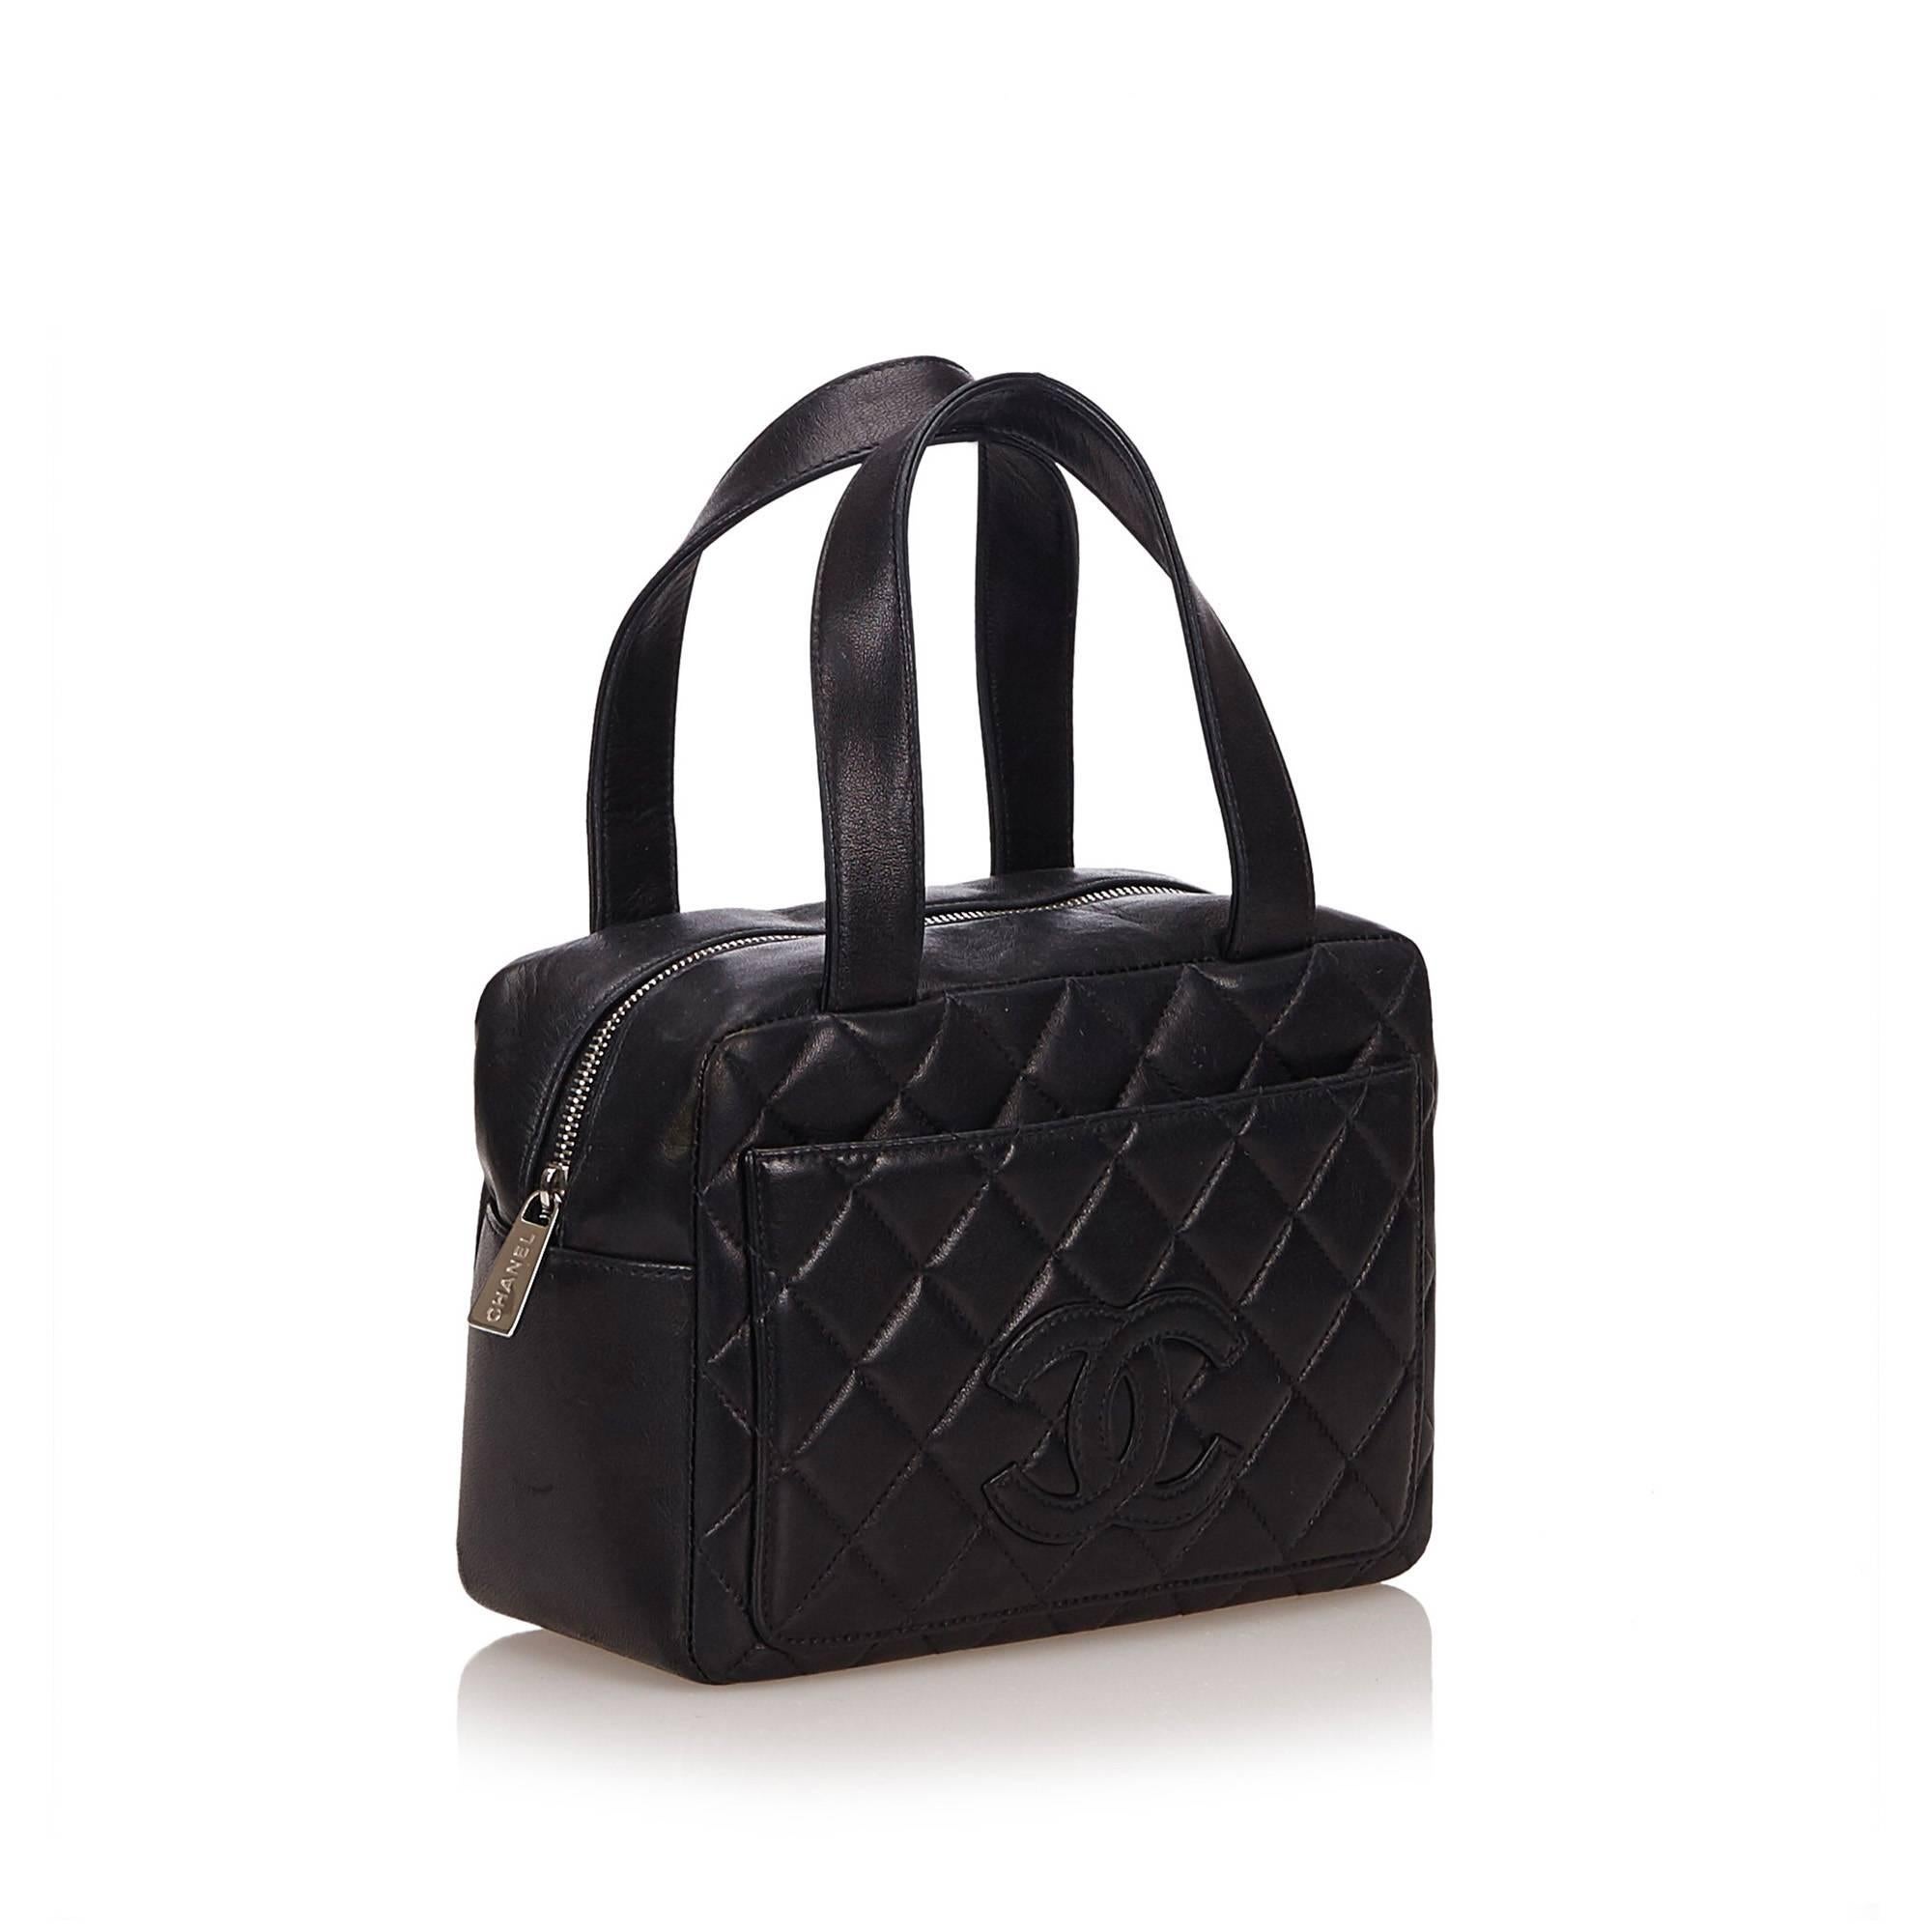 This handbag features a leather body, exterior front slip compartment, flat leather handles, top zip closure, and interior zip pocket. 

It carries a B condition rating.

Dimensions: 
Length 15 cm
Width 20 cm
Depth 9 cm
Hand Drop 8 cm

Inclusions: